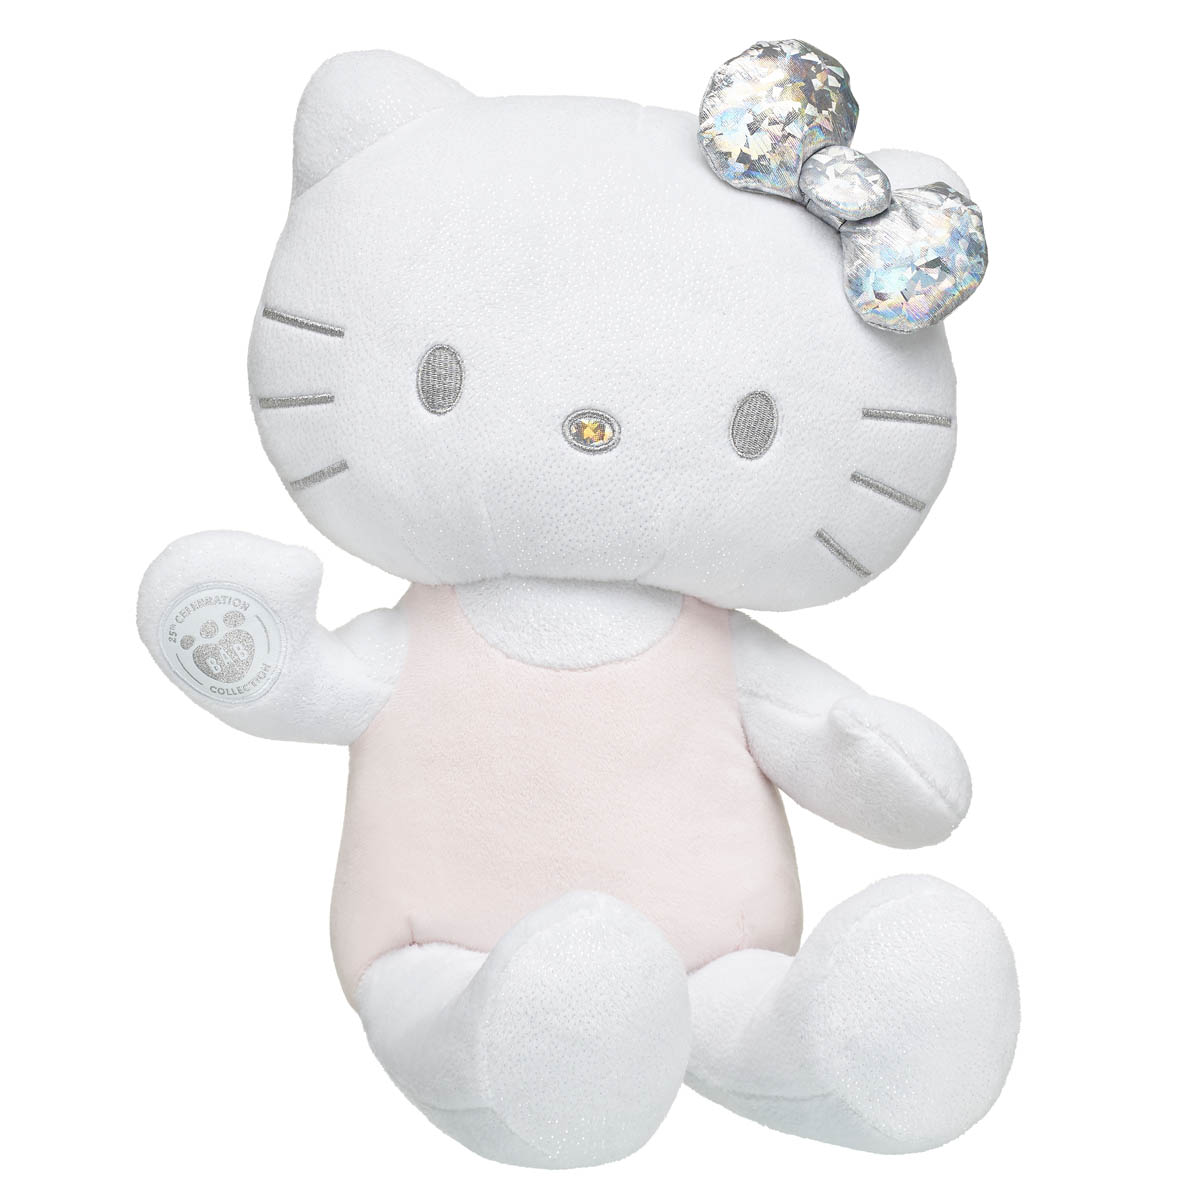 25th Hello Kitty — Build-a-Bear Workshop South Africa